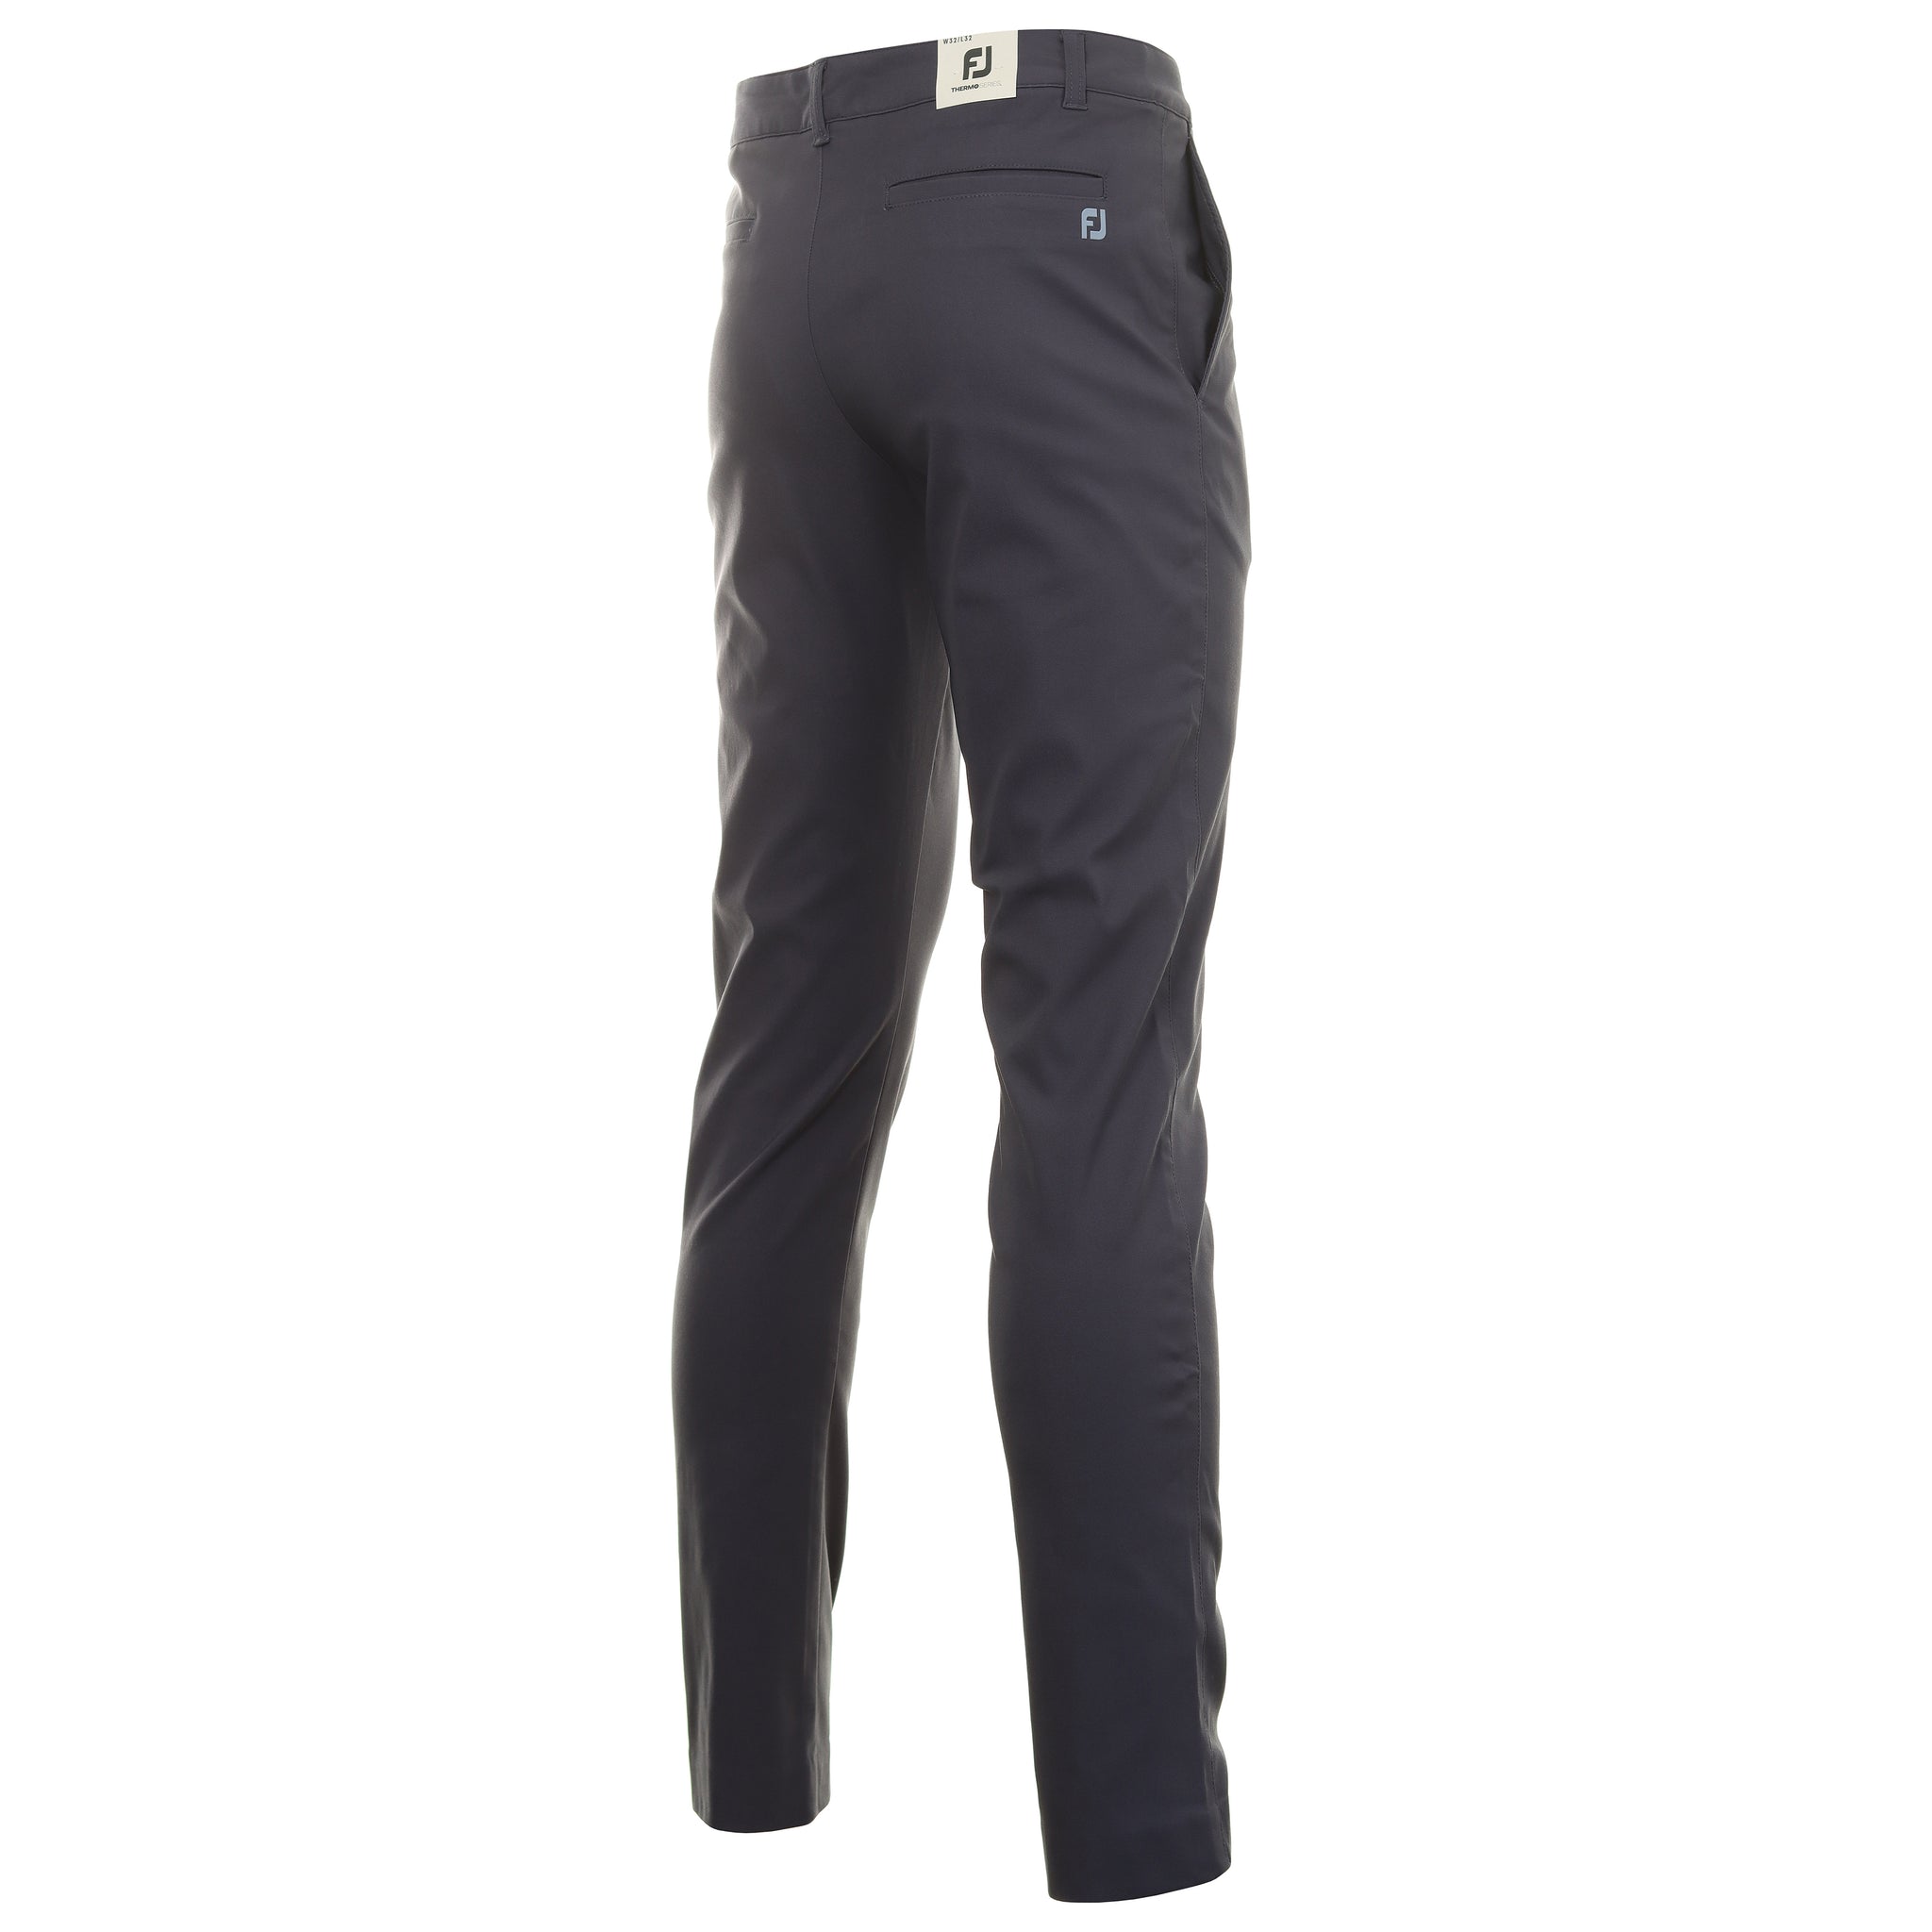 footjoy-thermoseries-trousers-88815-charcoal